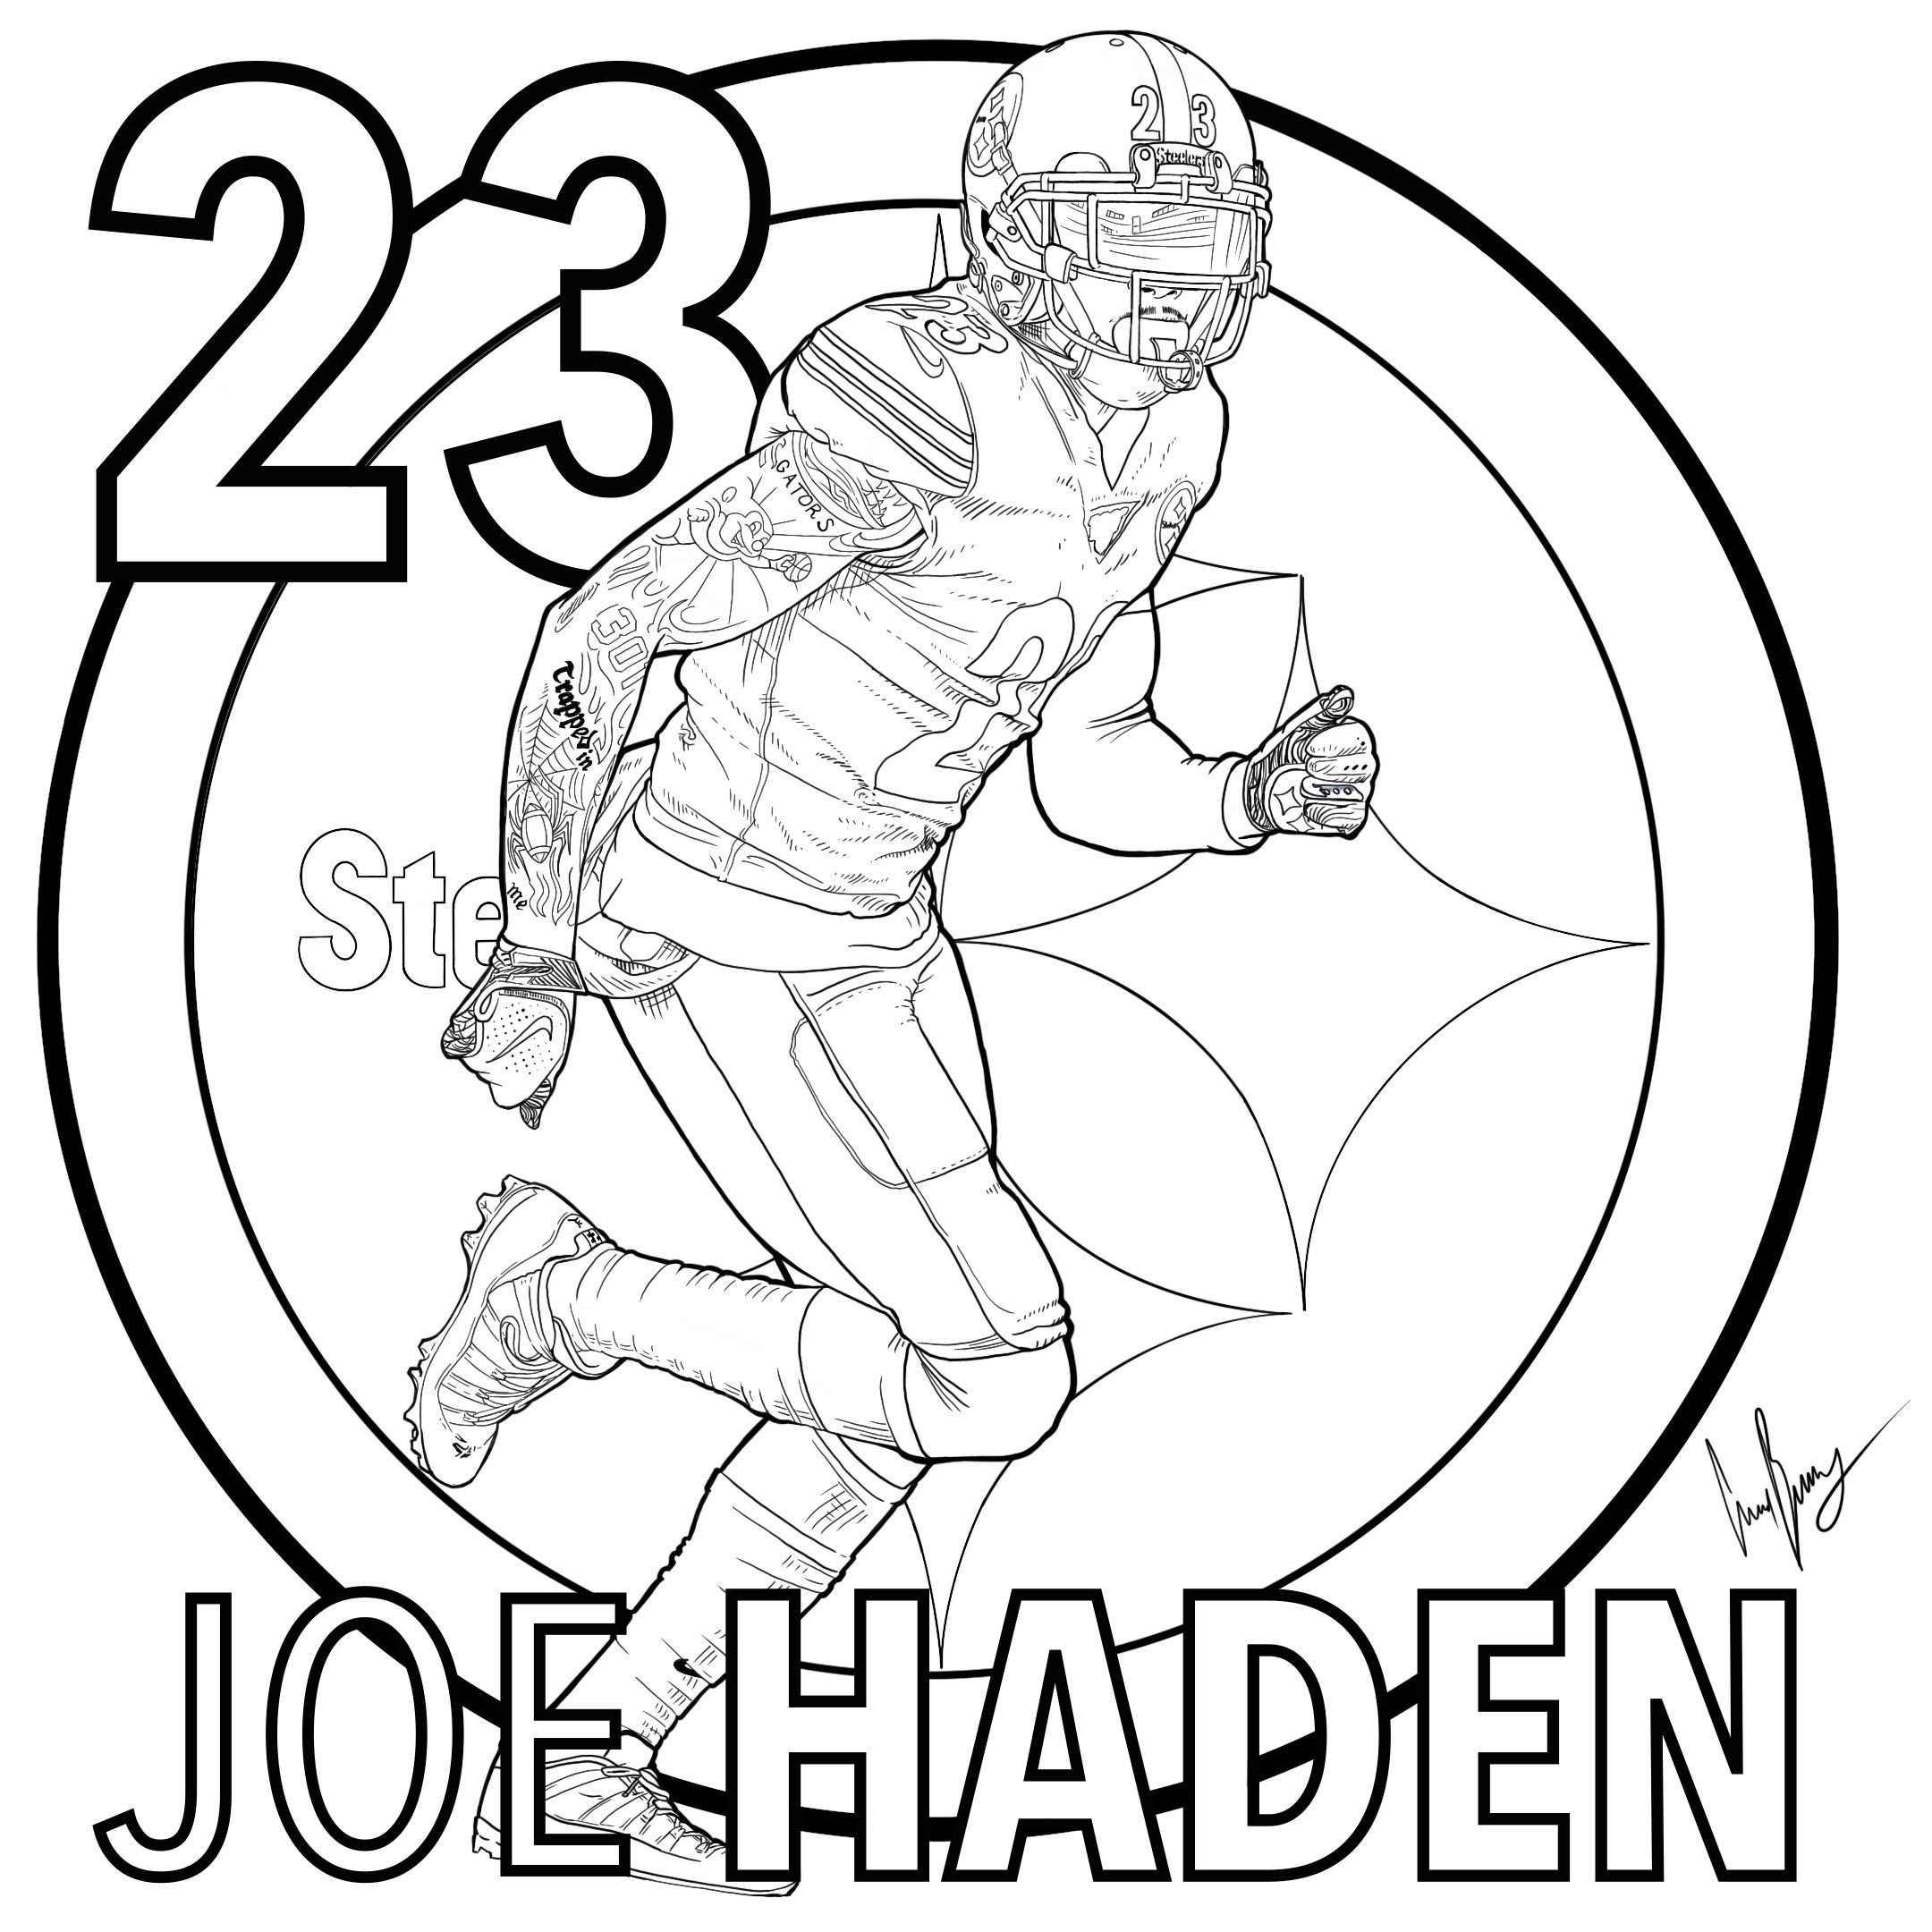 haden pittsburgh steelers coloring pages